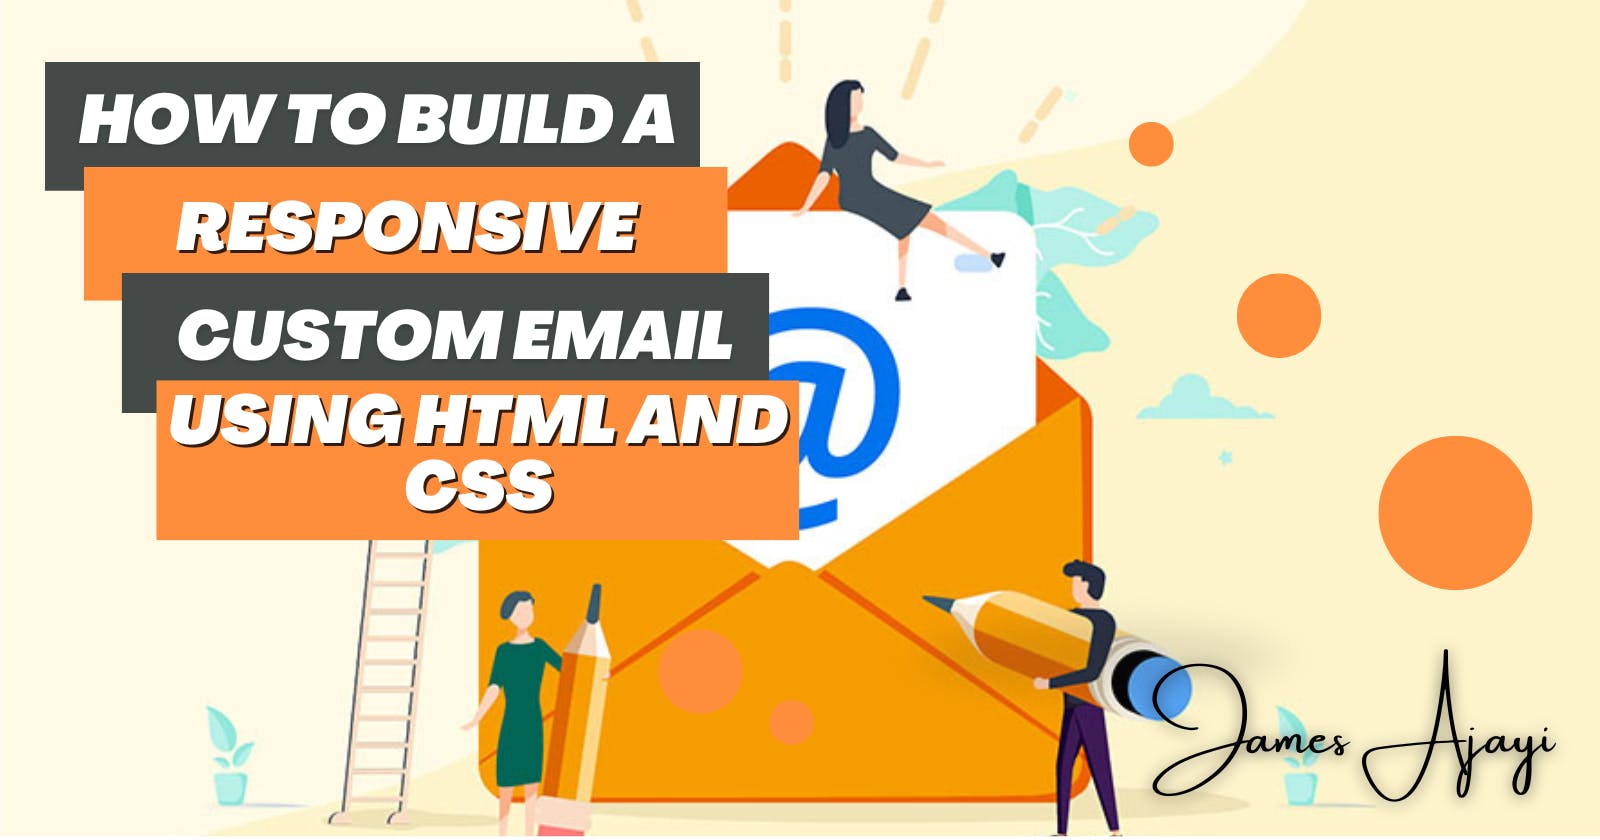 How to Build a Responsive Custom Email with HTML and CSS